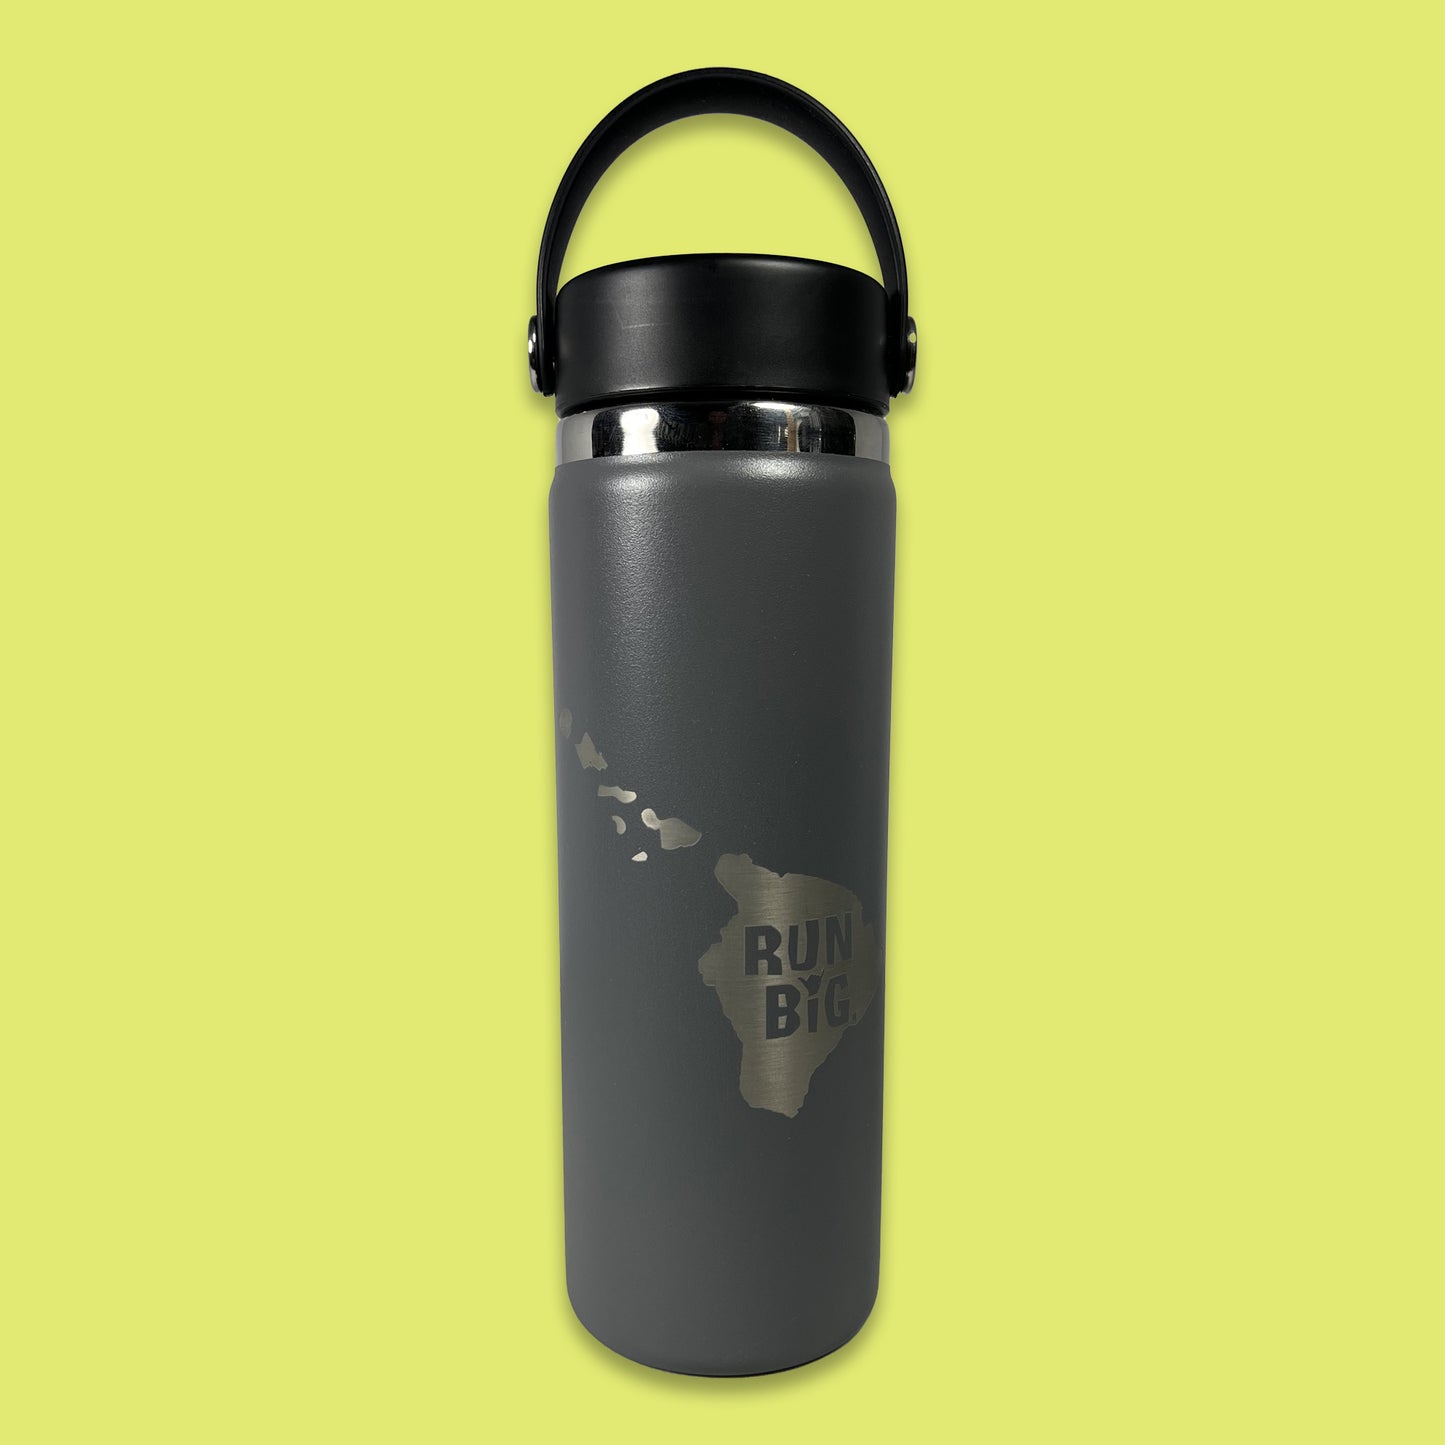 HydroFlask - 20 oz. Wide Mouth with Flex Lid